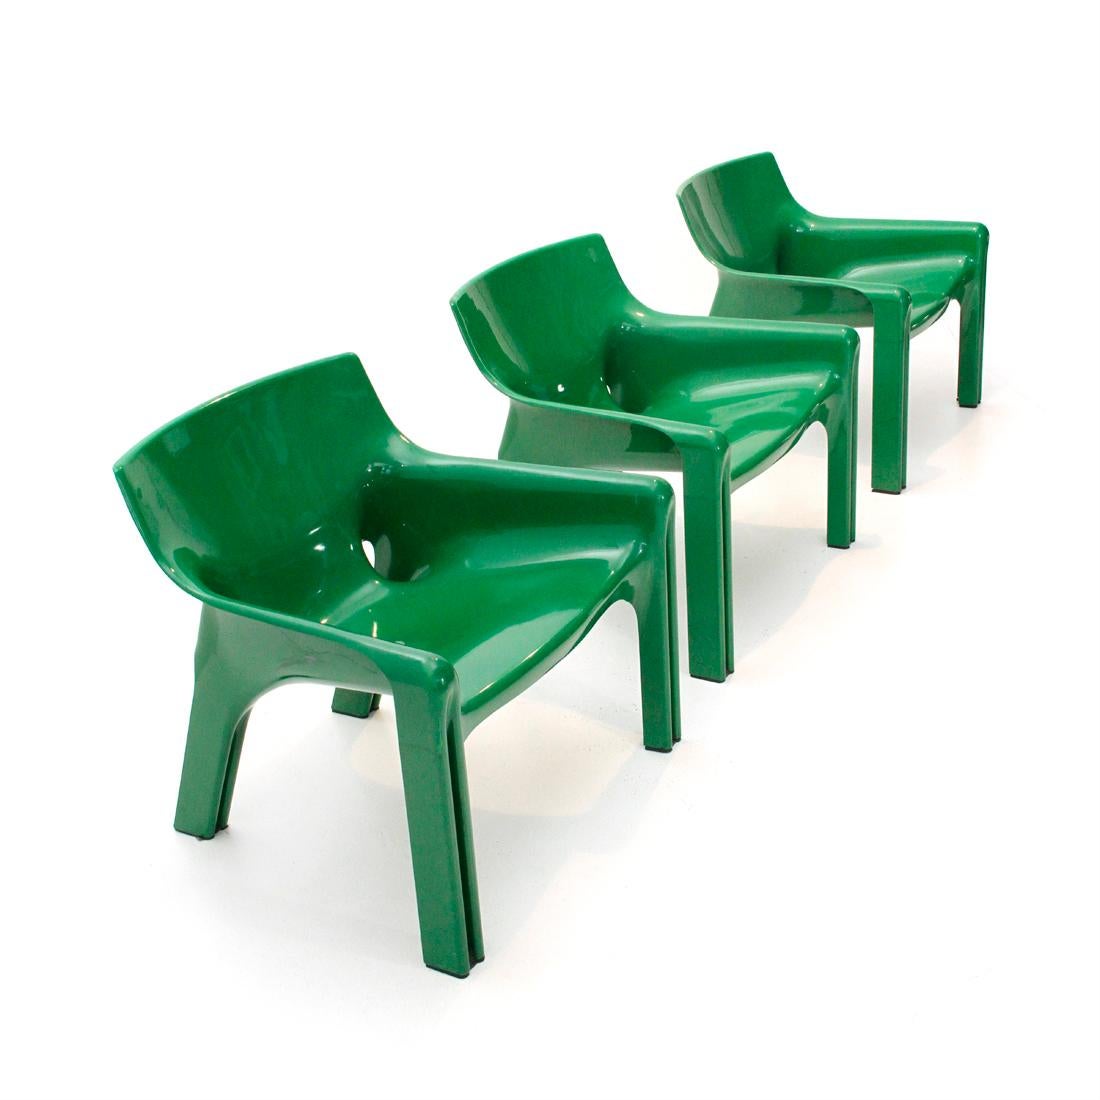 Vicario armchair of the 1970s designed by Vico Magistretti for Artemide.
Green plastic structure.
Good general conditions, some signs due to normal use over time.

Dimensions: Length 72 cm - Depth 67 cm - Height 68 cm - Seat height 37 cm